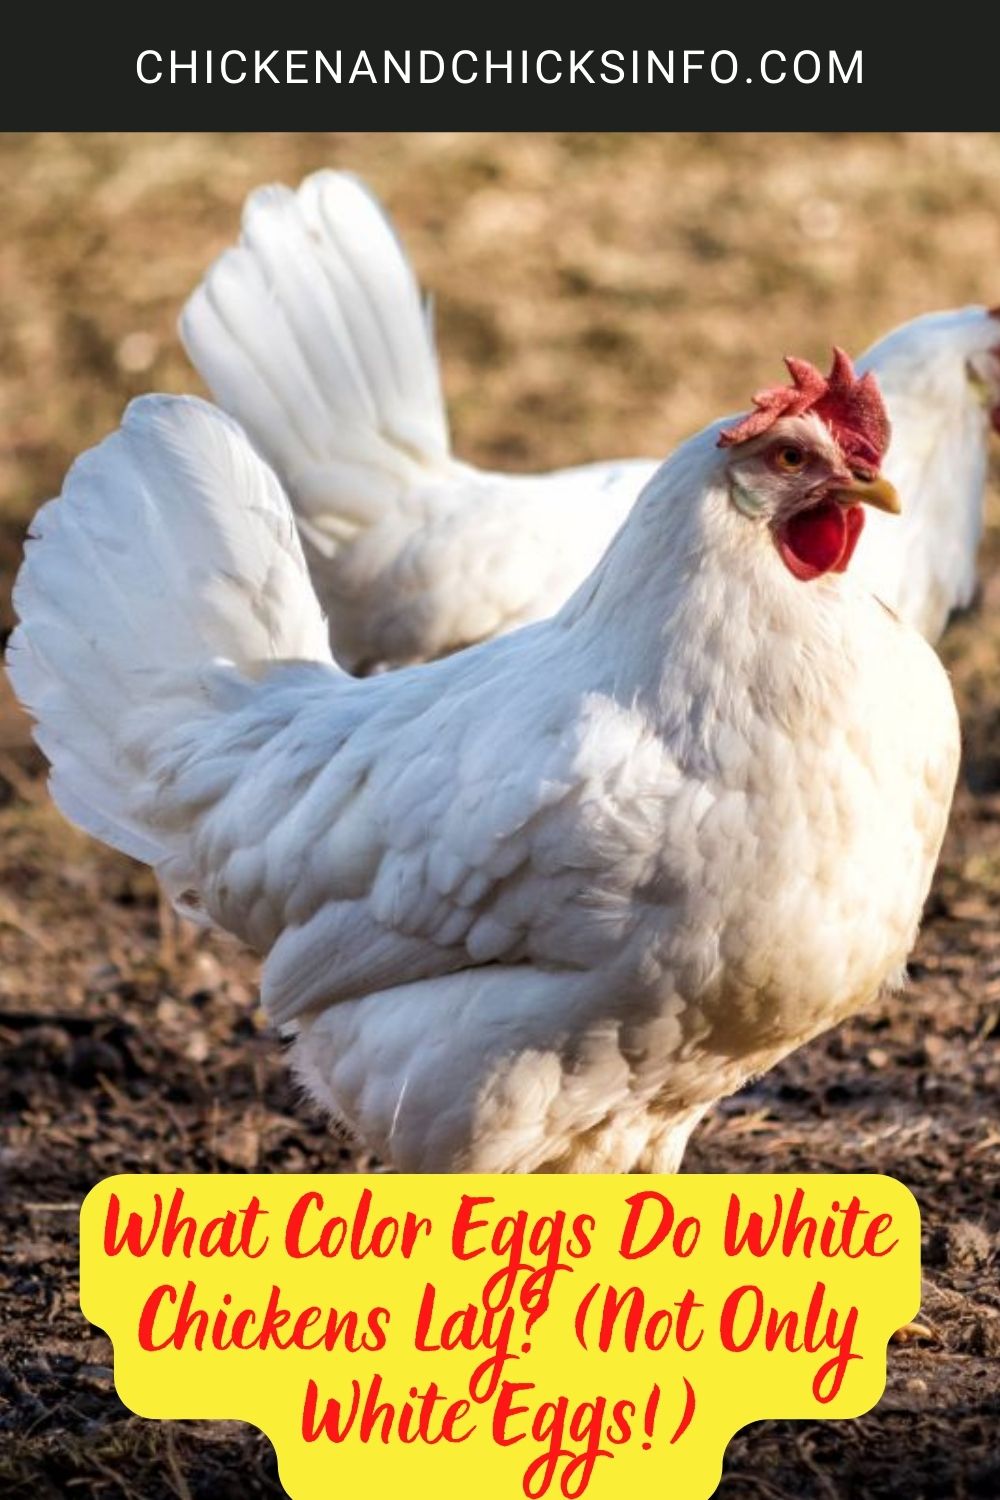 What Color Eggs Do White Chickens Lay? (Not Only White Eggs!) poster.
